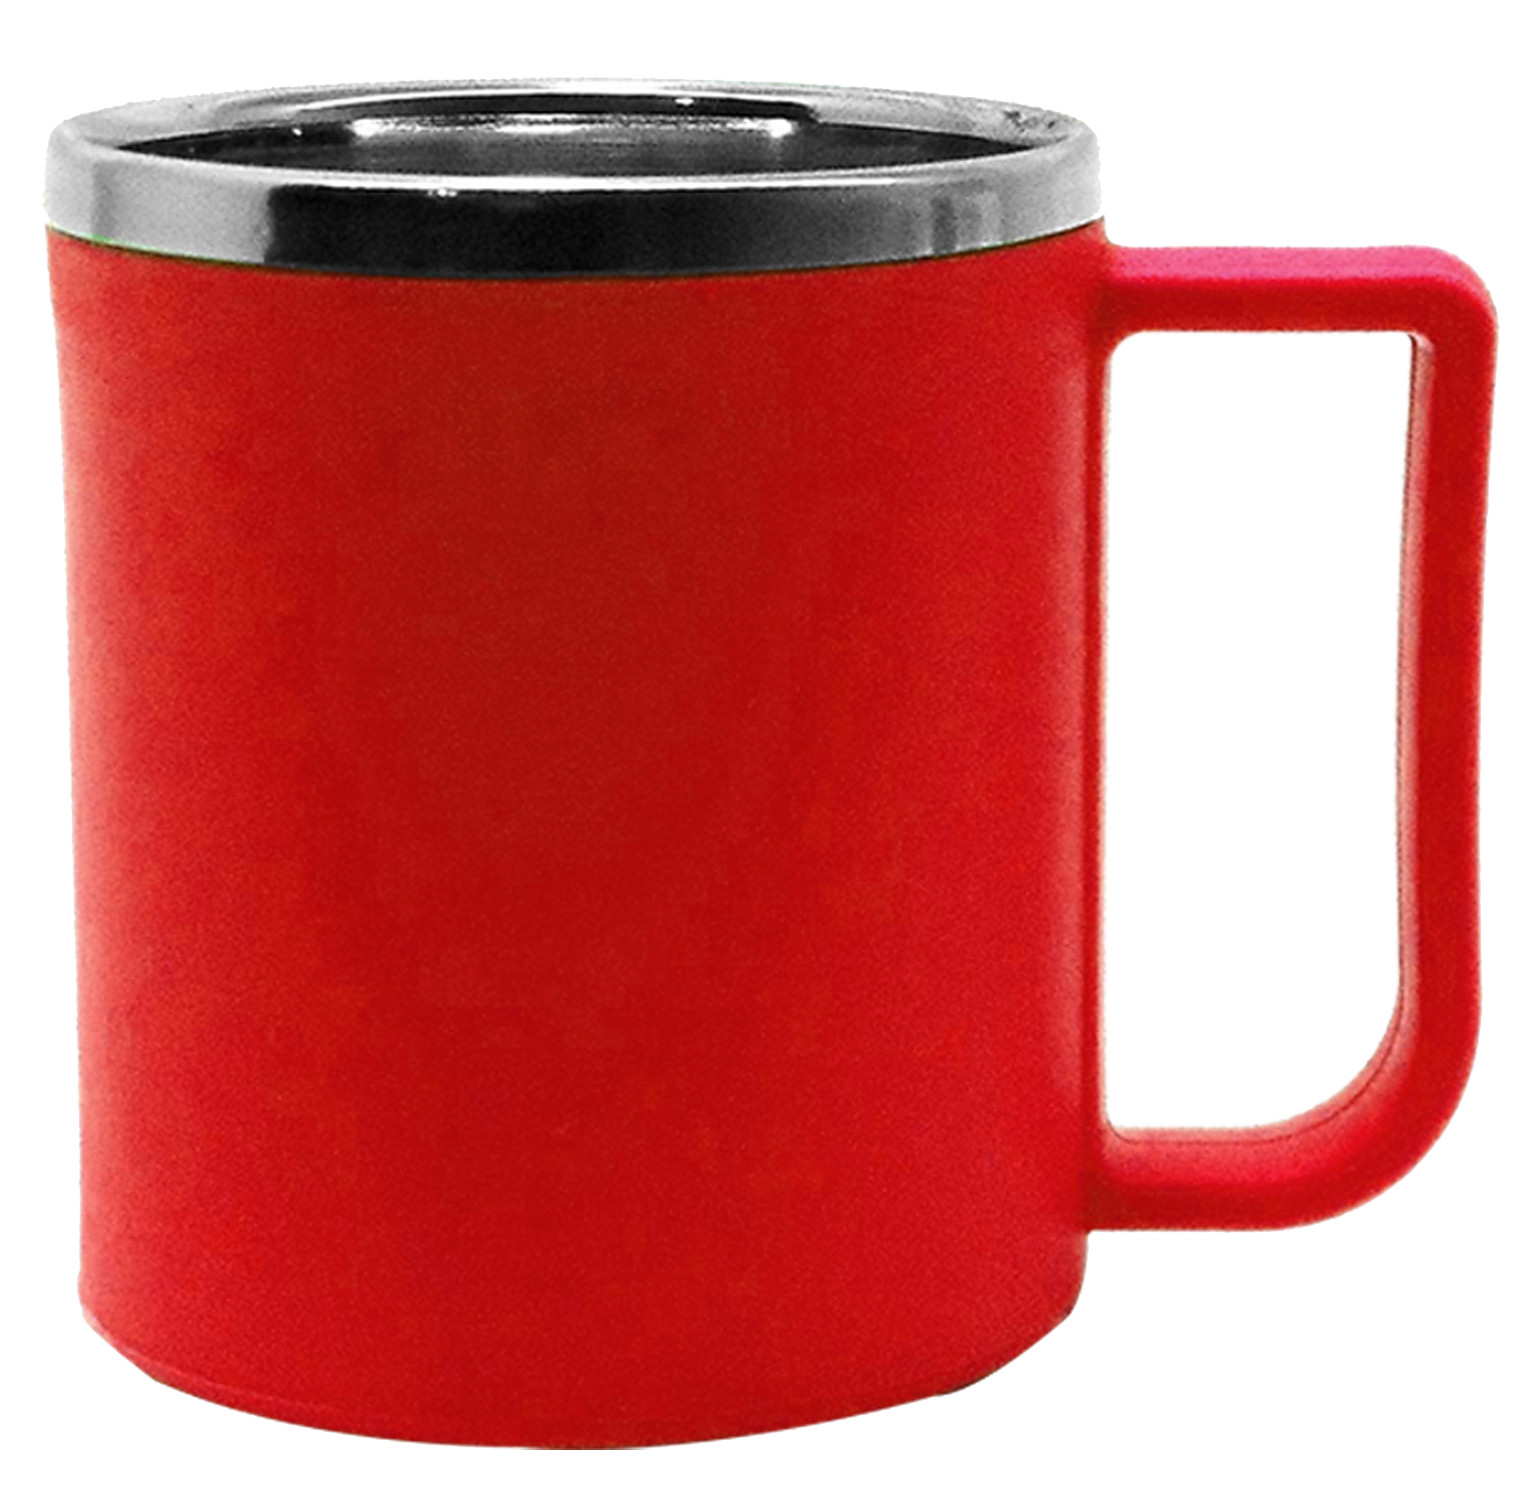 Kuber Industries Plastic Steel Cups for Coffee Tea Cocoa, Camping Mugs with Handle, Portable & Easy Clean,(Red & Brown)